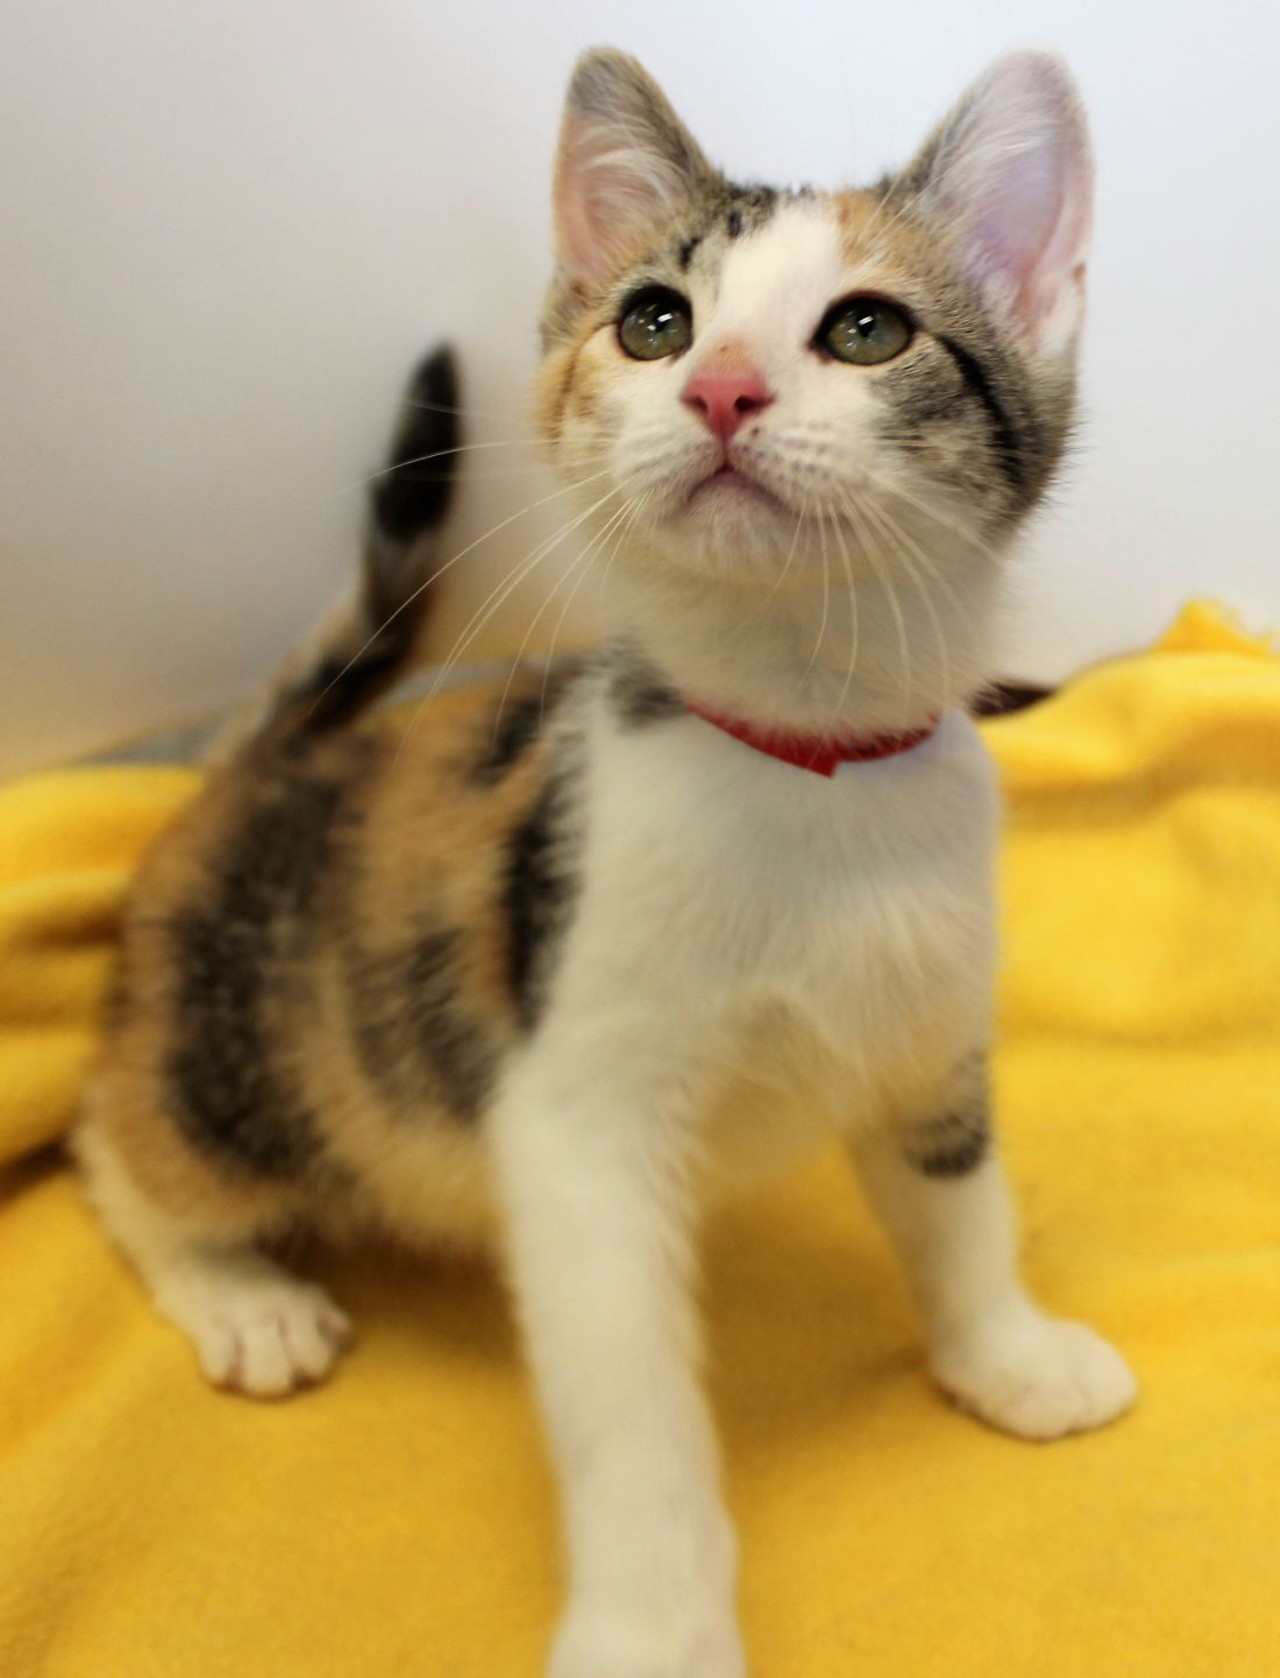 NAME:Starfire
GENDER: Female
BREED: Domestic Short Hair 
AGE: 9 weeks 
WEIGHT: 3 pounds 
SPECIAL CONSIDERATIONS:  None
REASON I CAME TO MHS: Homeless in Detroit 
LOCATION: Mackey Center for Animal Care in Detroit 
ID NUMBER: 869150